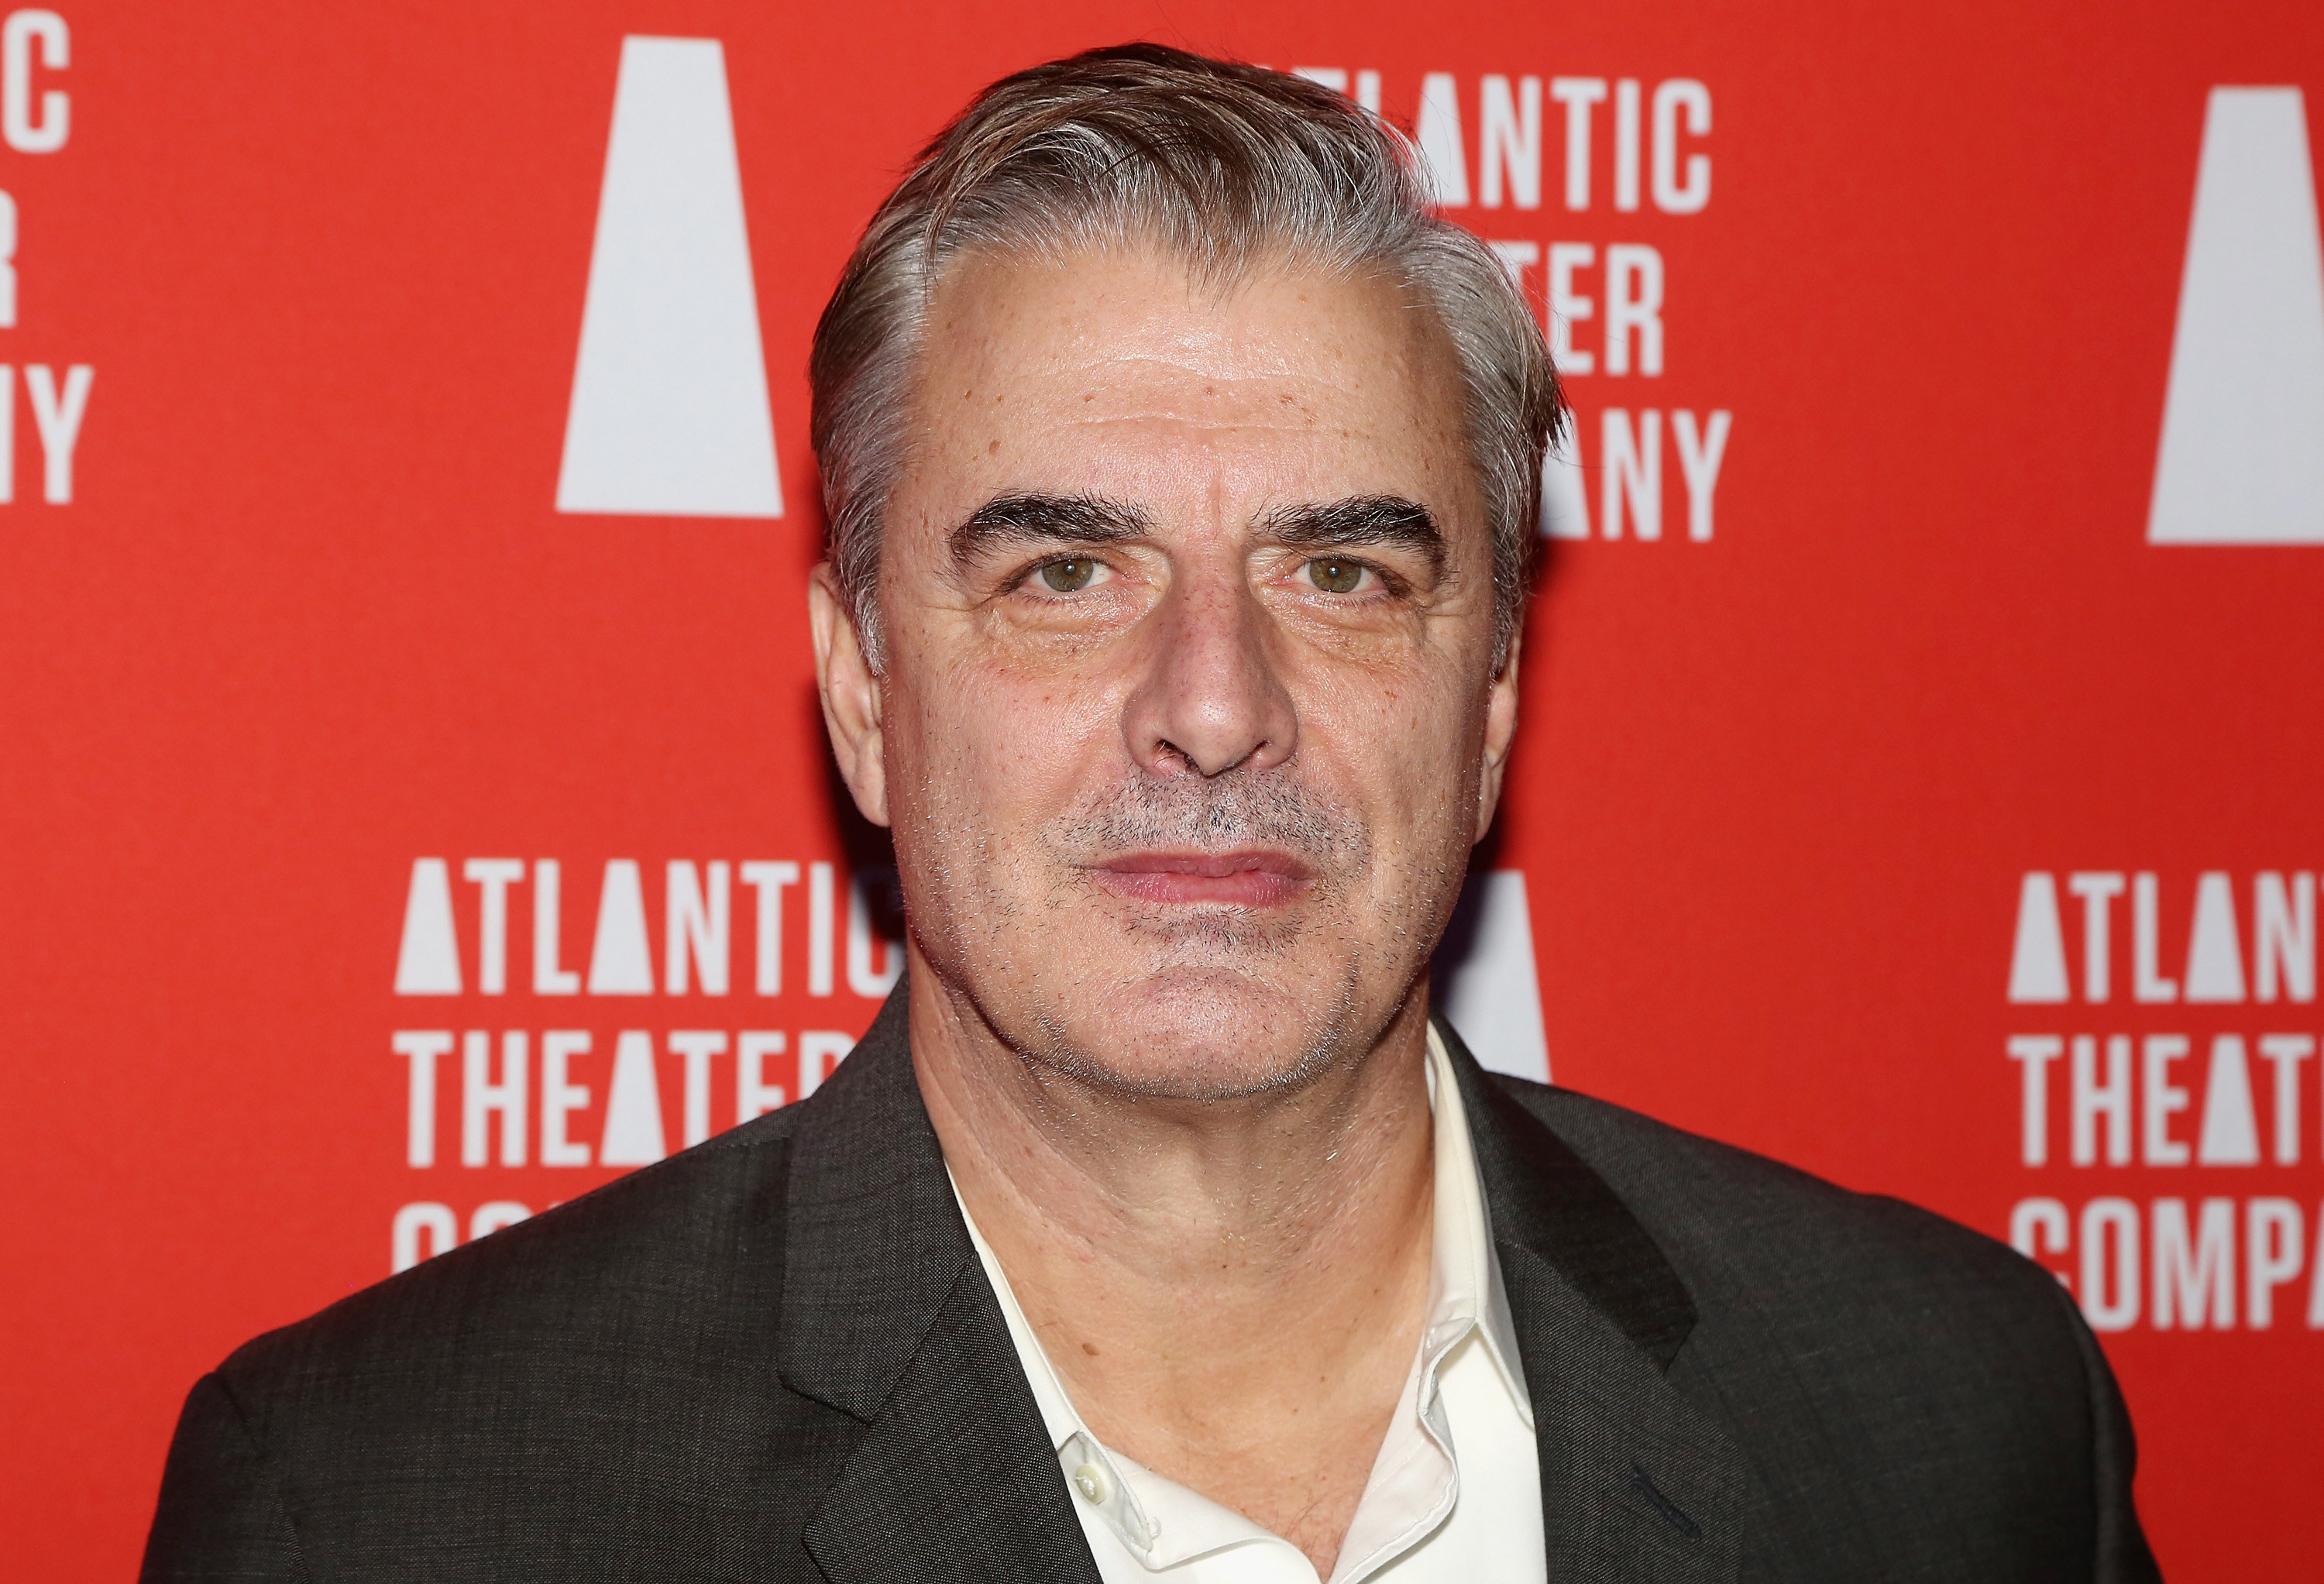 Chris Noth Now Accused Of Sexual Assault By 5 Women